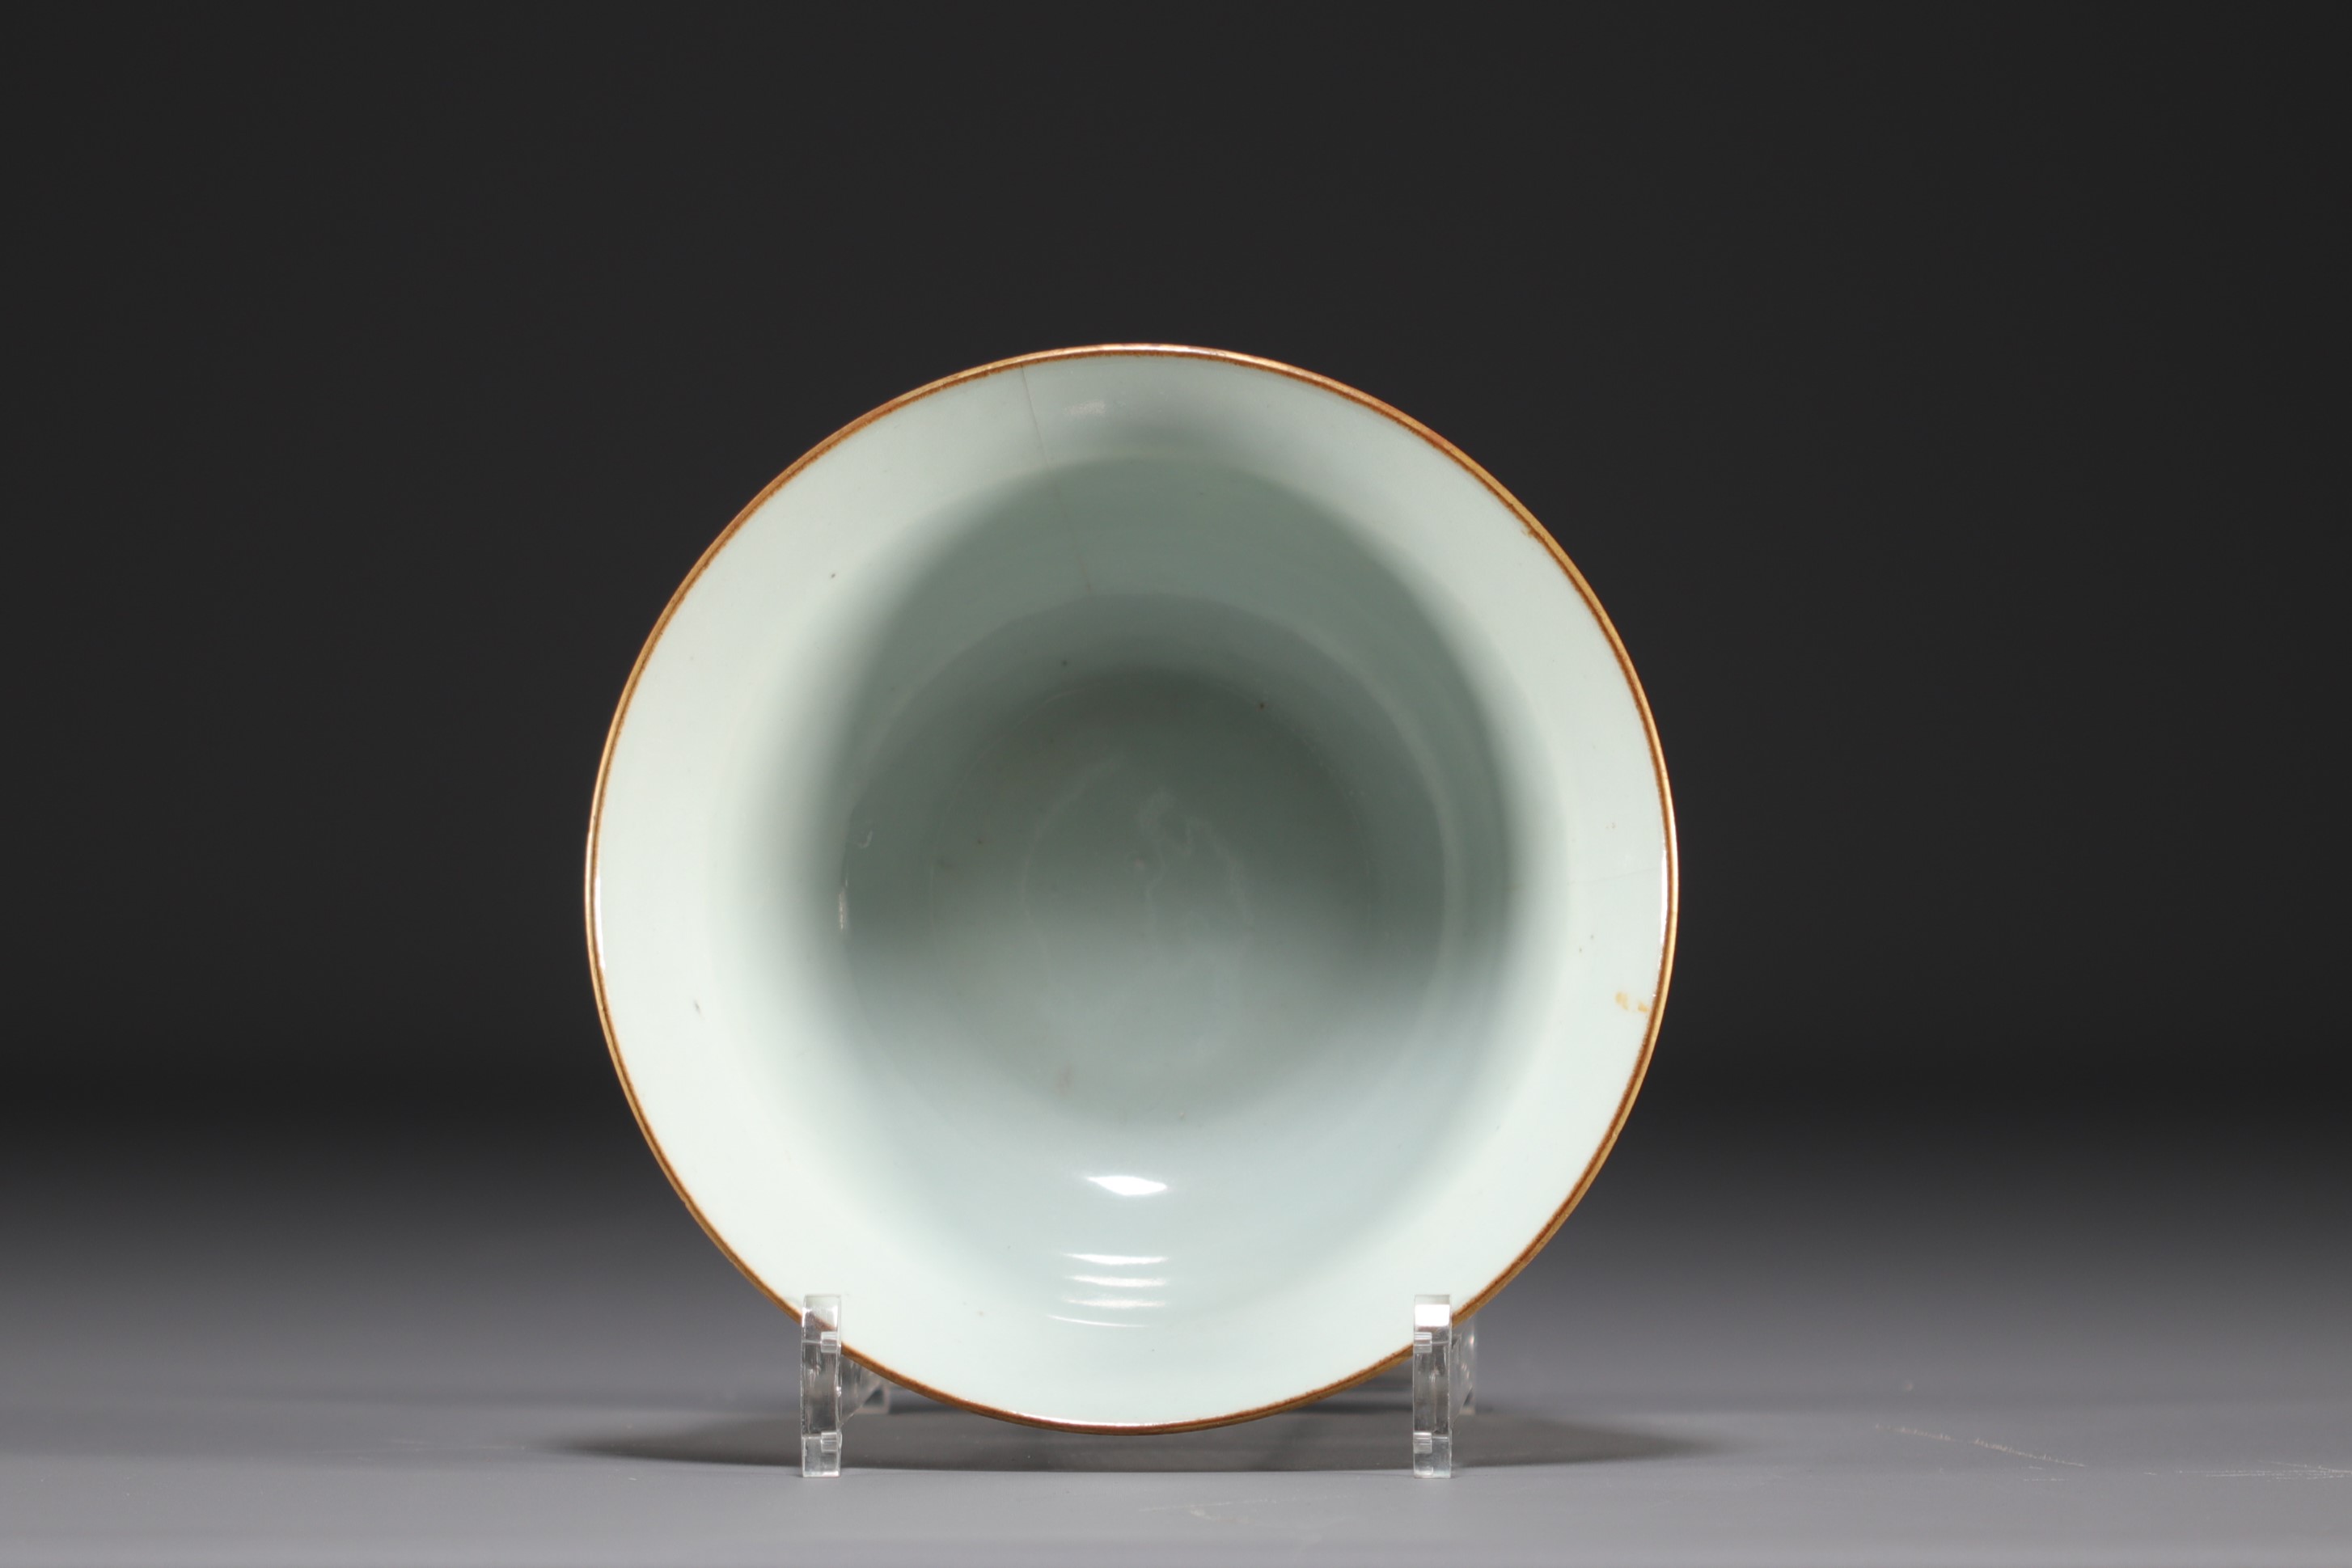 China - Porcelain bowl decorated with peaches and bats, Jiaqing period, late 18th / early 19th centu - Image 4 of 4